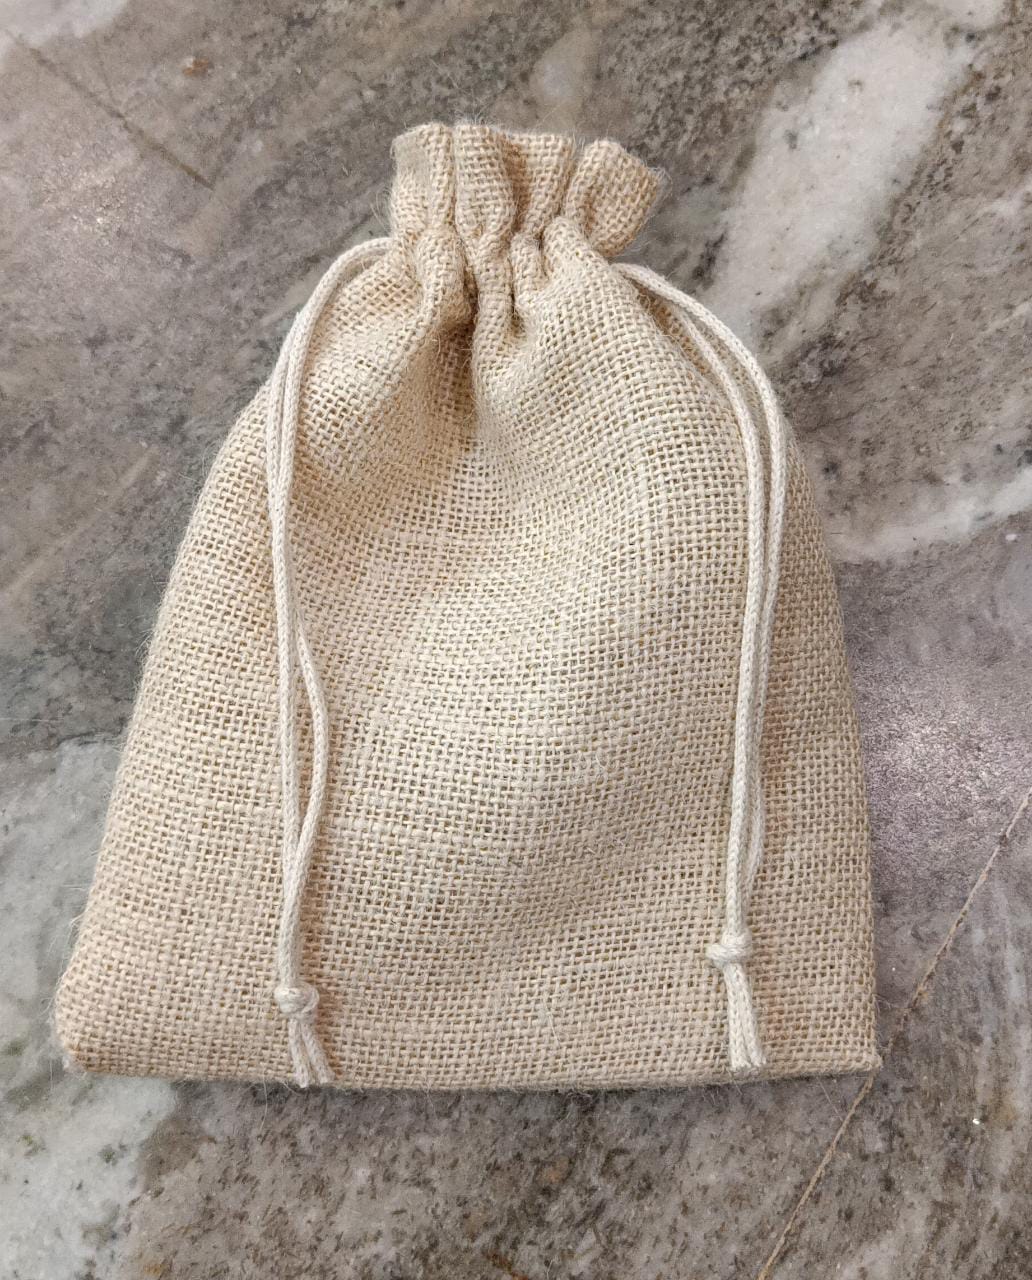 Jute bags- conferences, events, wedding gifts